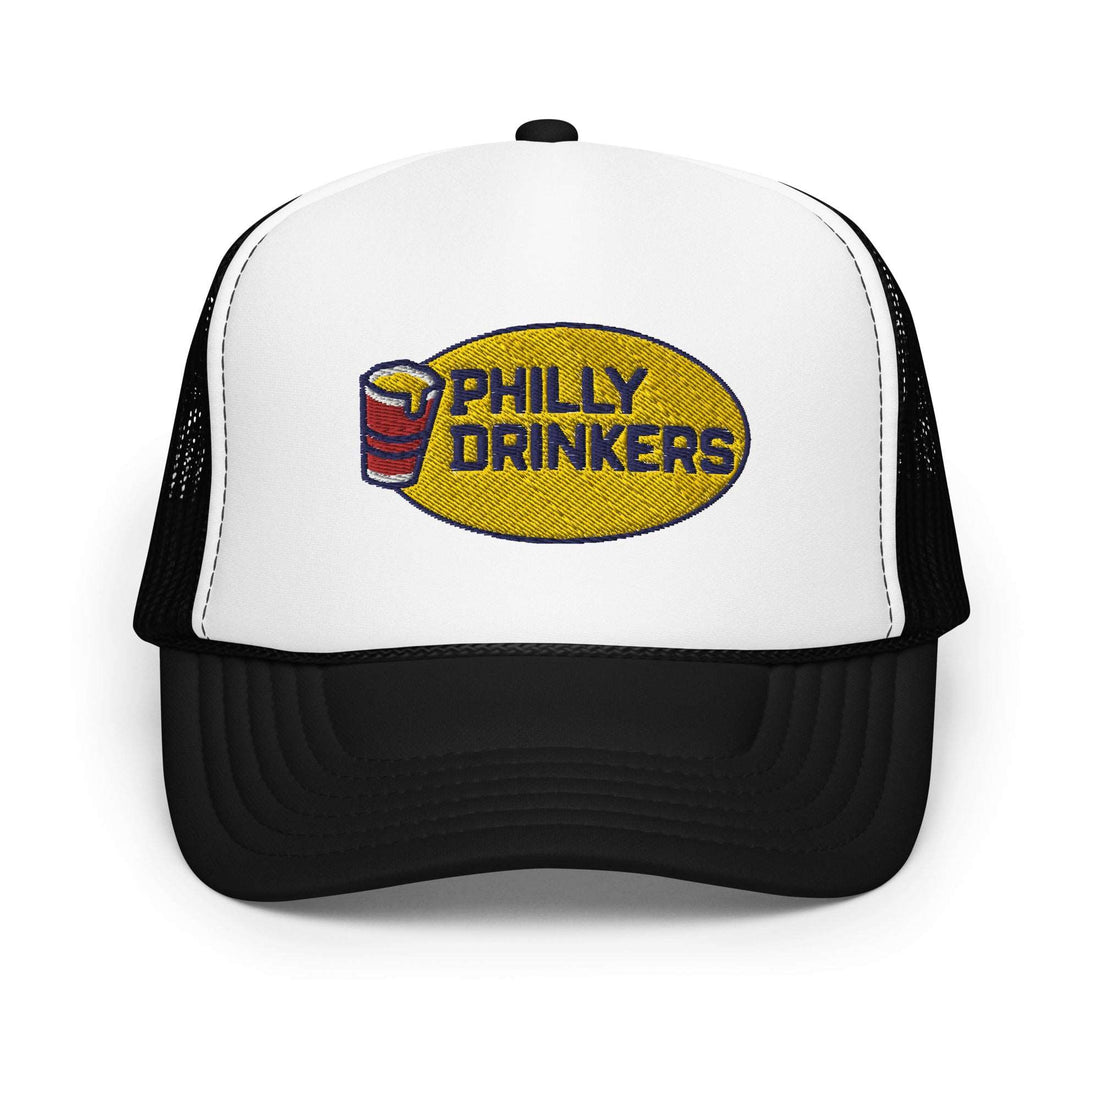 Philly Drinkers Classic Trucker Hat